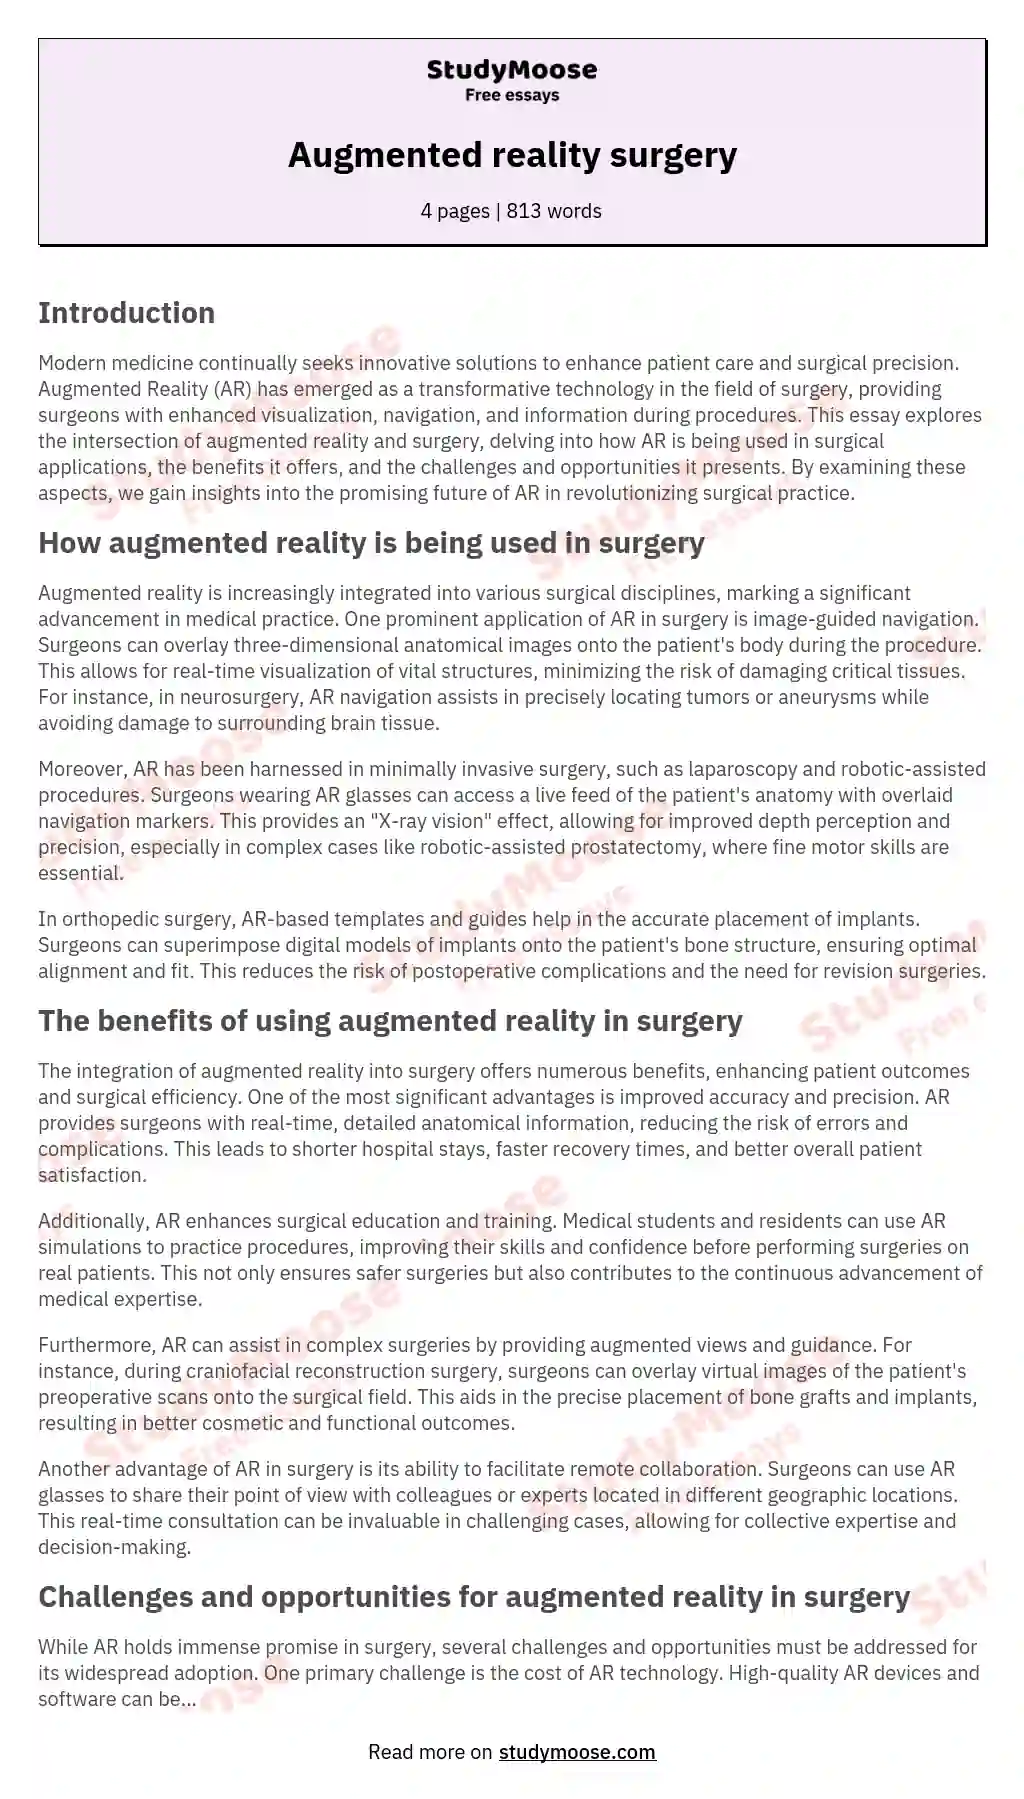 Augmented reality surgery essay